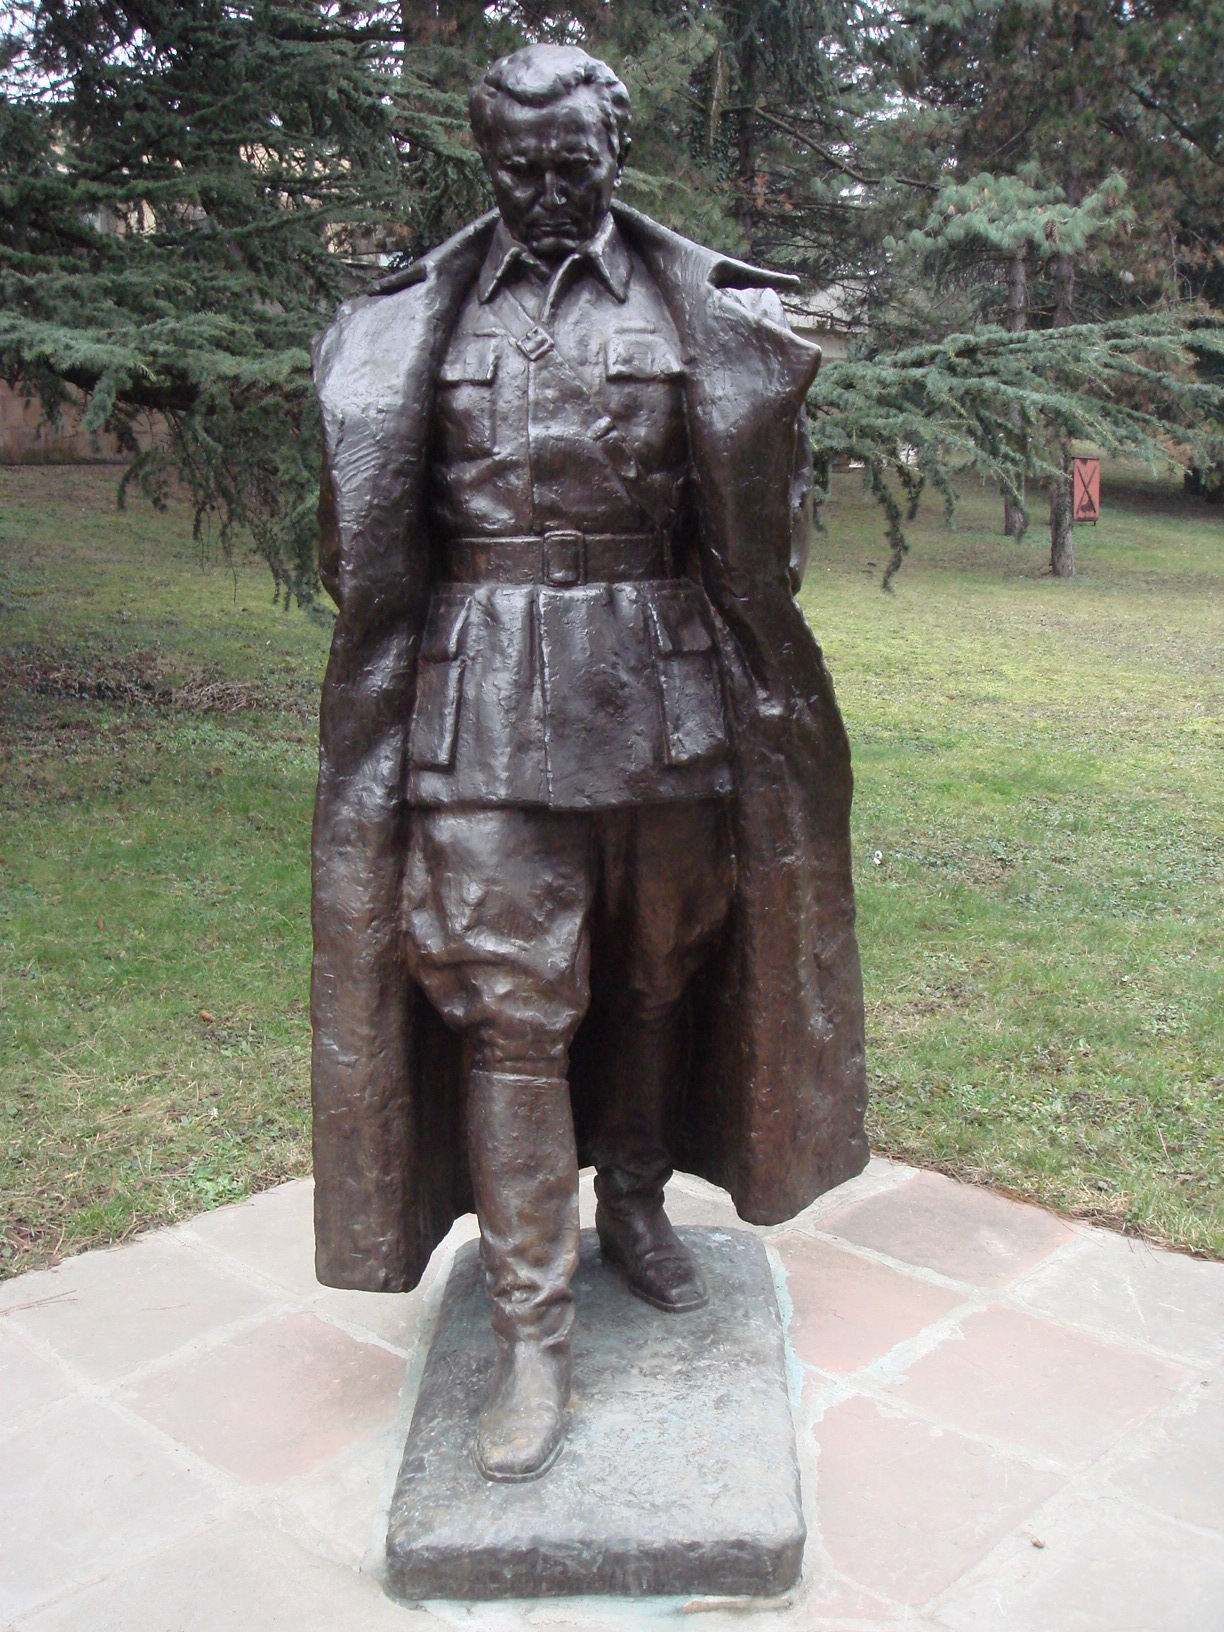 a statue of a man in a suit stands on bricks